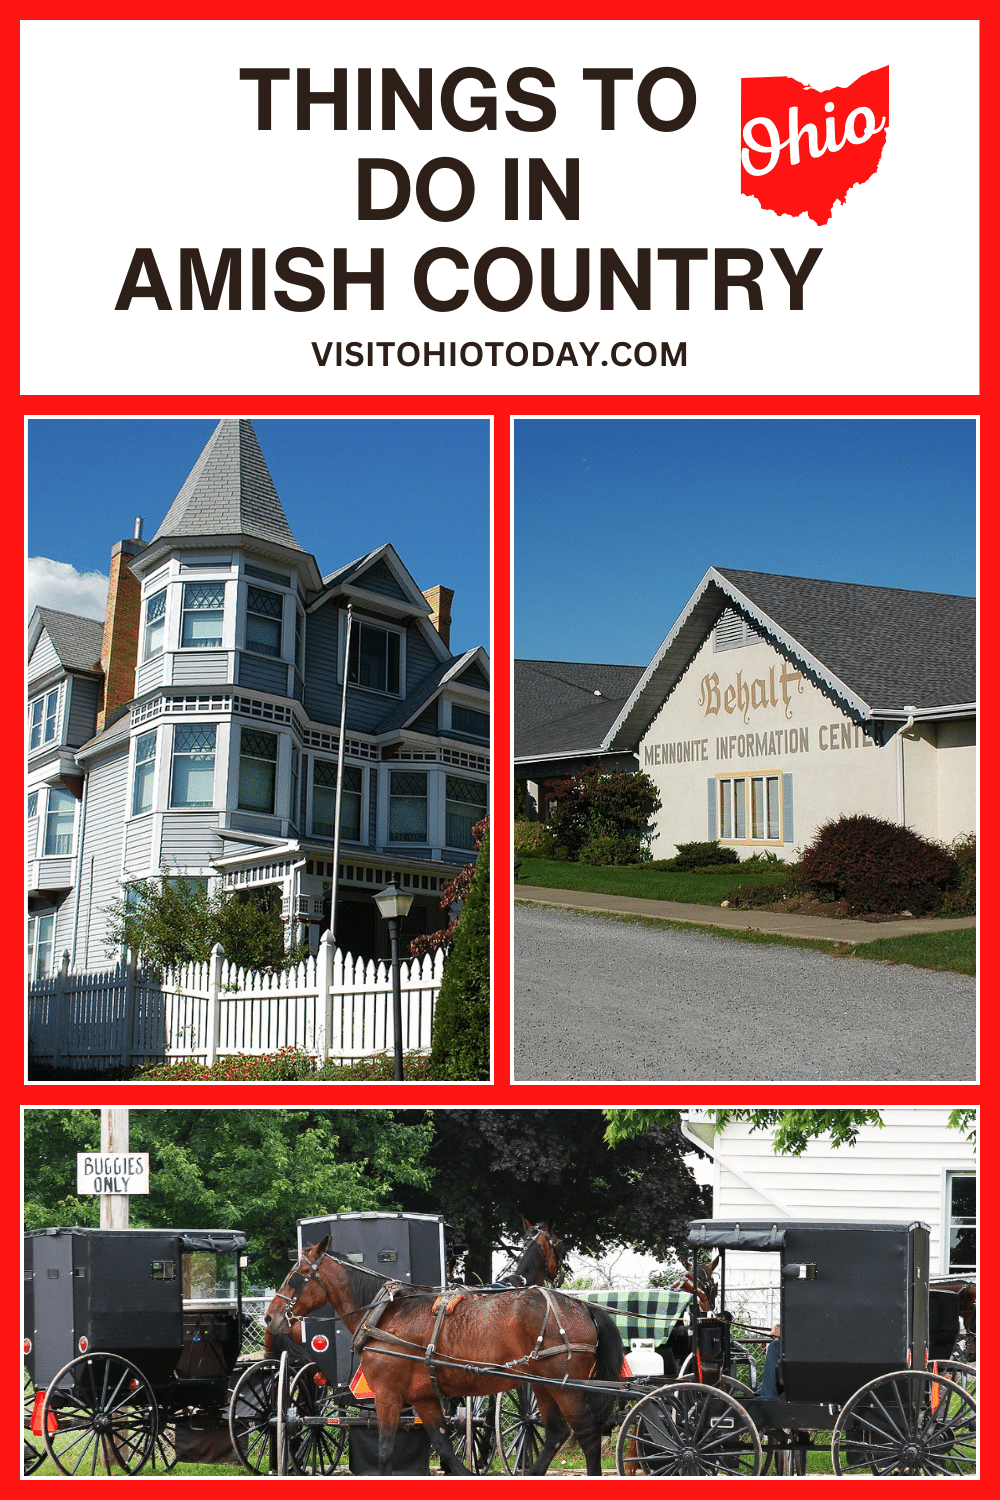 Amish Country in northeast Ohio is surrounded by rolling hills and wide-open spaces. There are a lot of things to do in Amish Country, with an emphasis on the Amish way of life and their food.